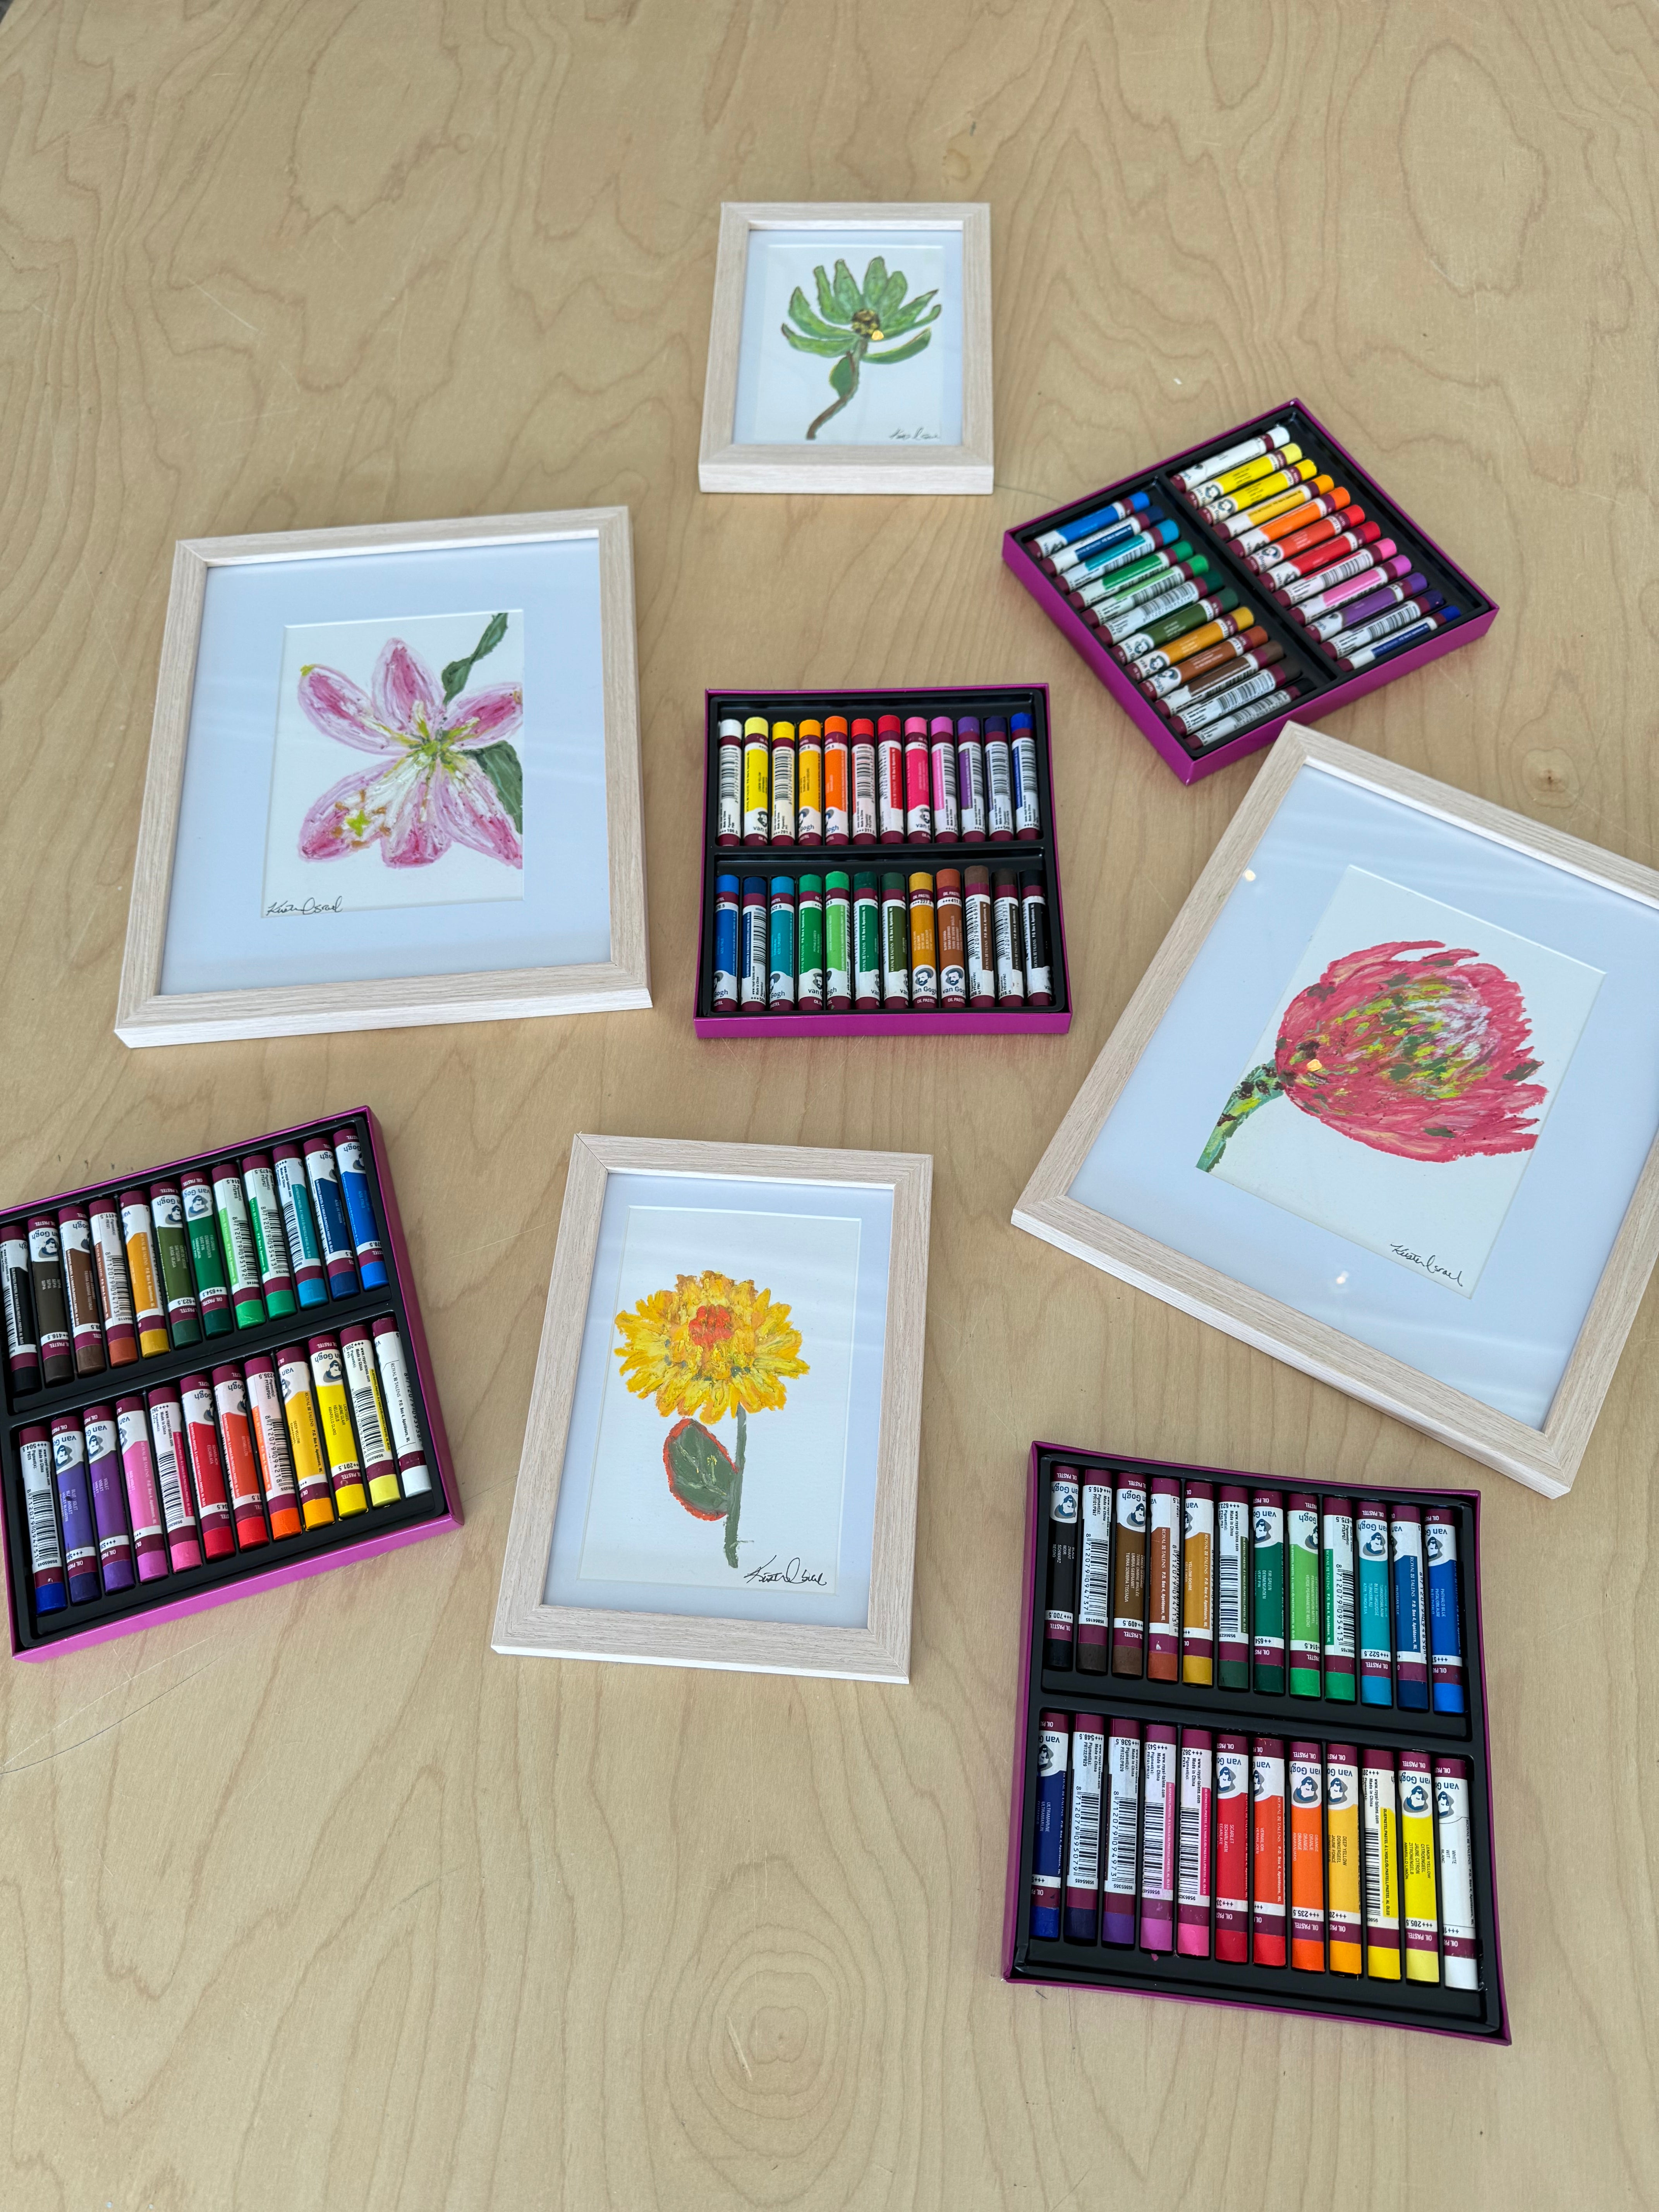 MAR 30th IN-PERSON - Framed Oil Pastel Flower Drawing with Kirsten Israel